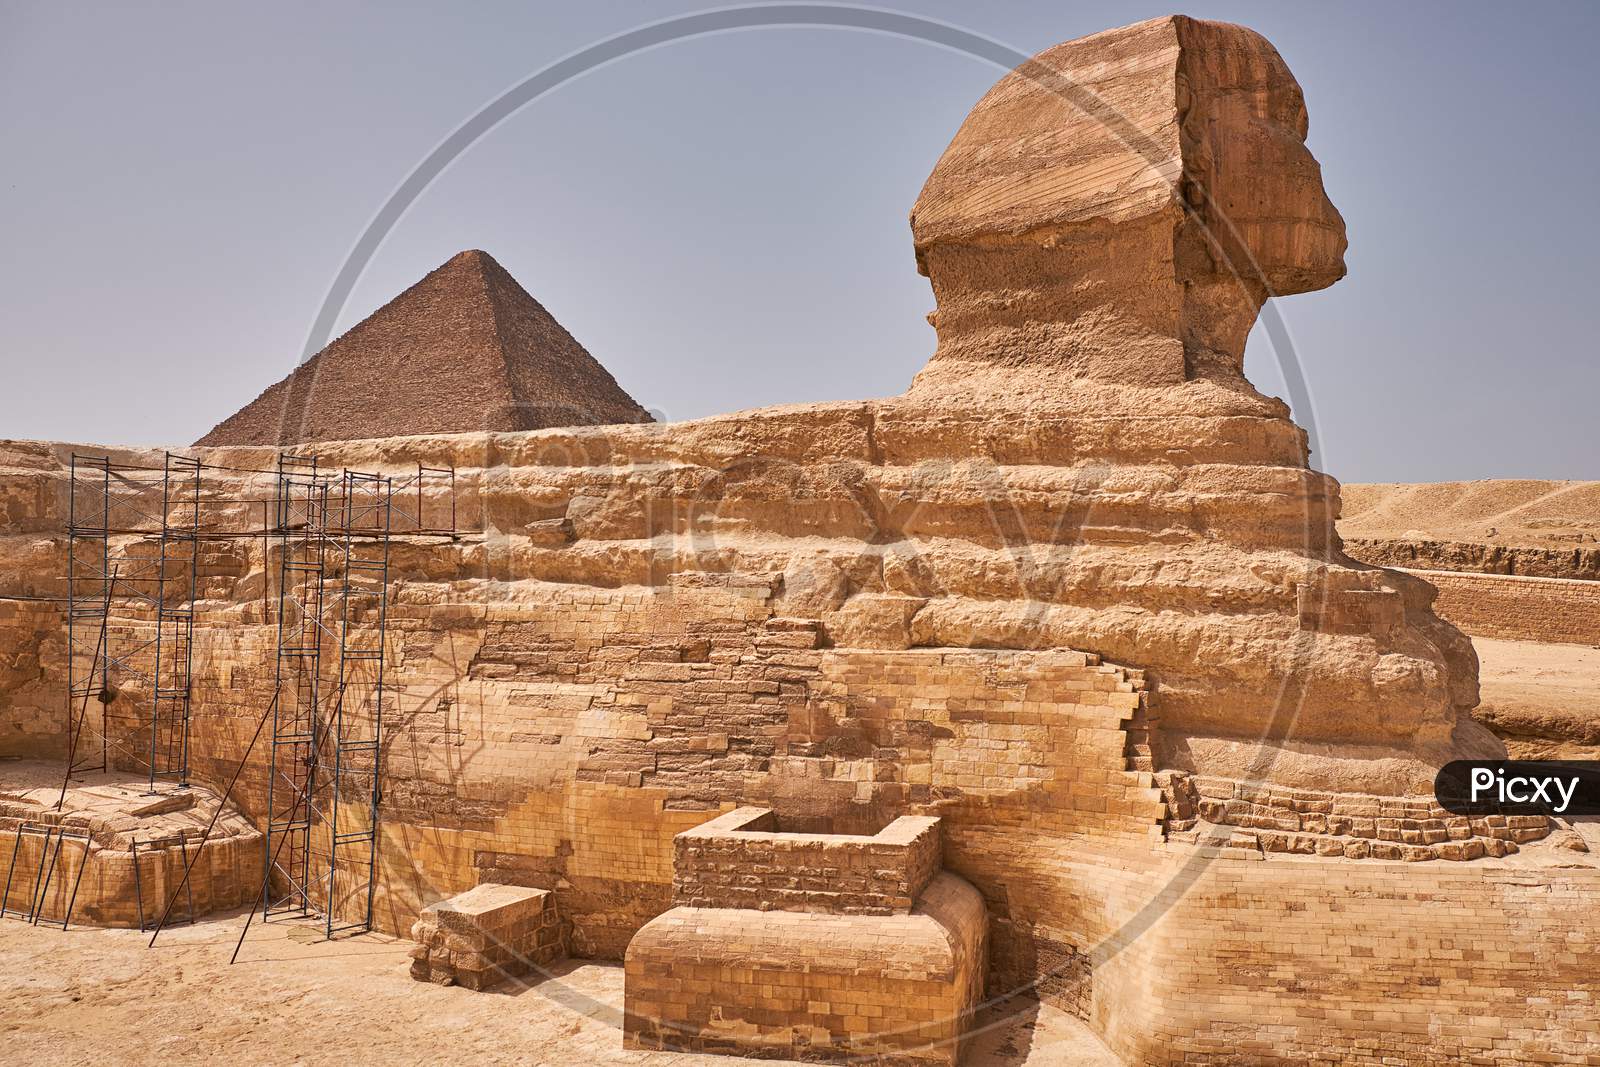 Great Sphinx Of Giza On The Giza Plateau In Cairo, Egypt